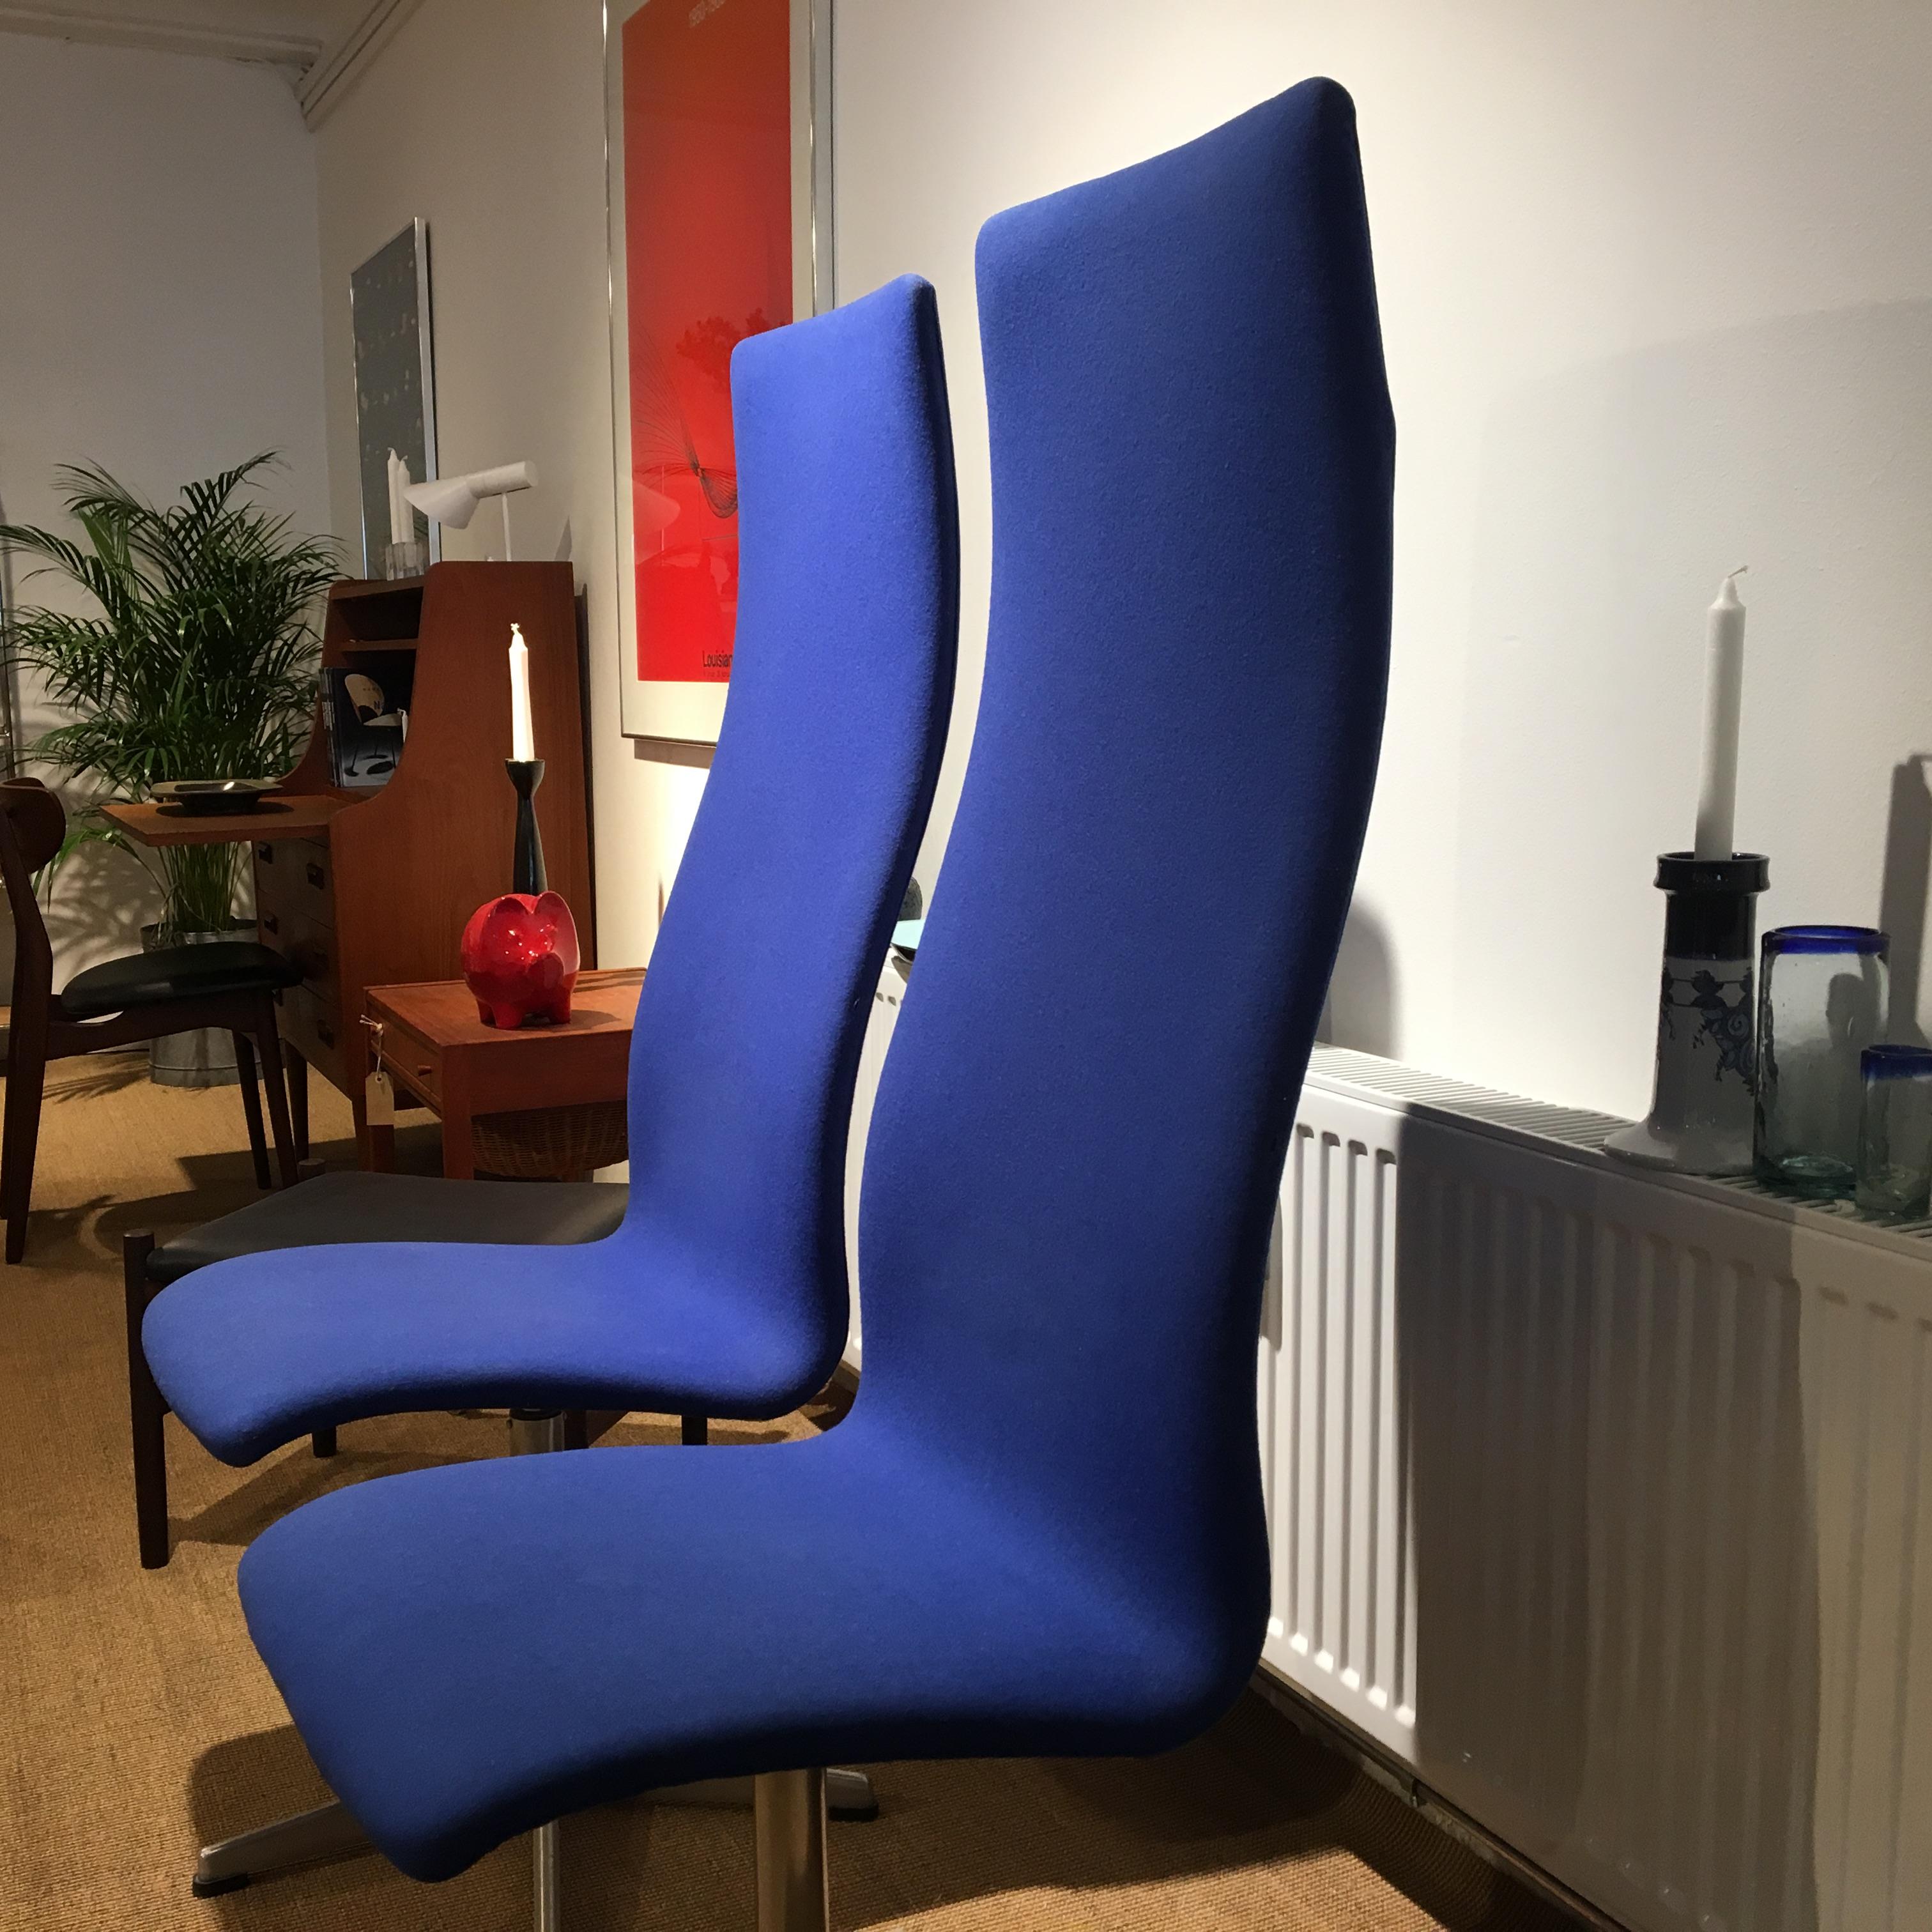 Oxford Chairs Model AJ 3273 by Arne Jacobsen In Fair Condition For Sale In Odense, Denmark